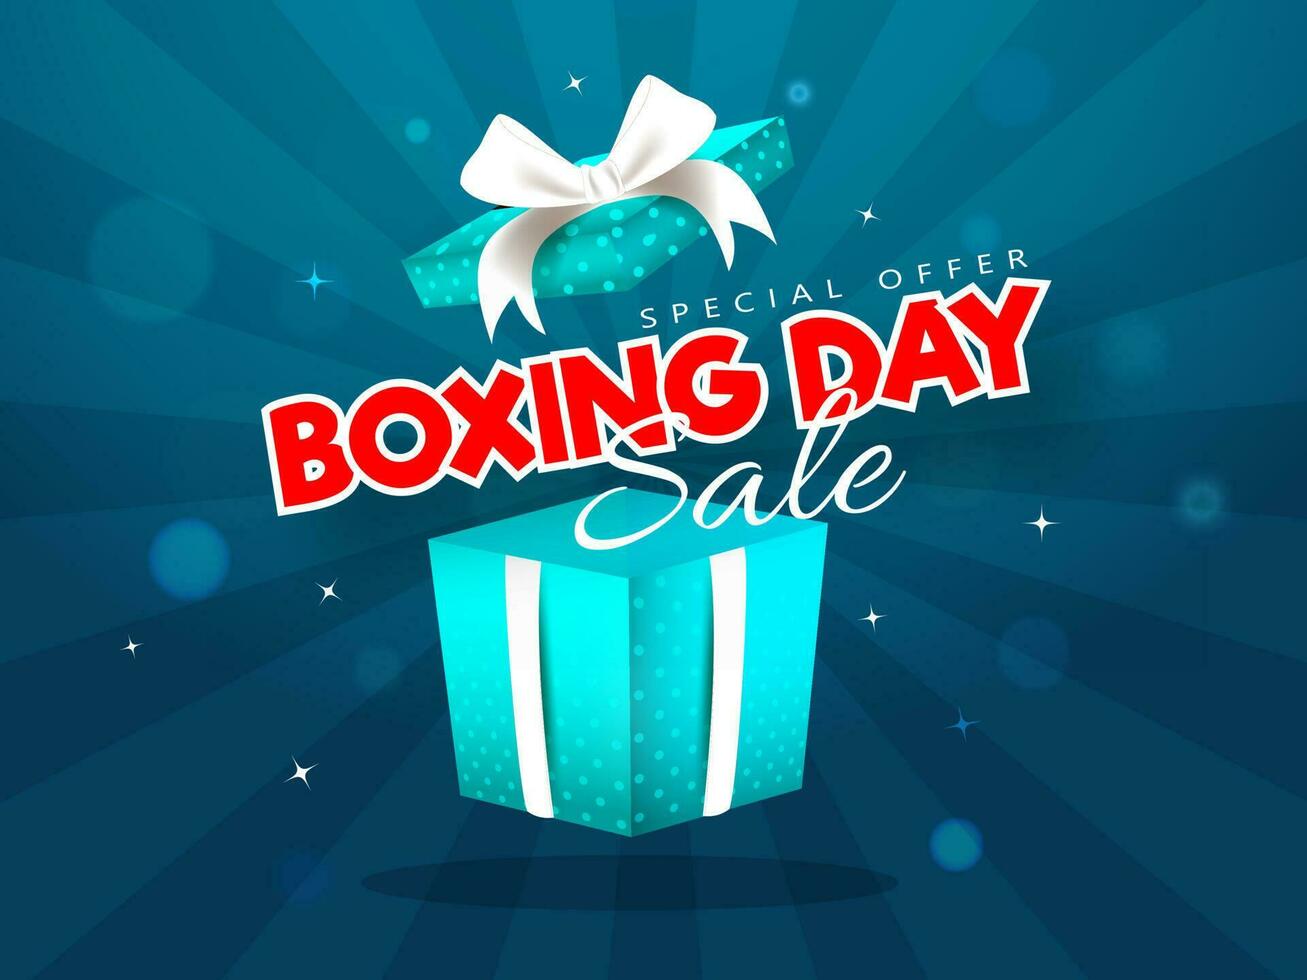 Advertising sale poster design with surprise gift box of Boxing Day on blue rays background. vector